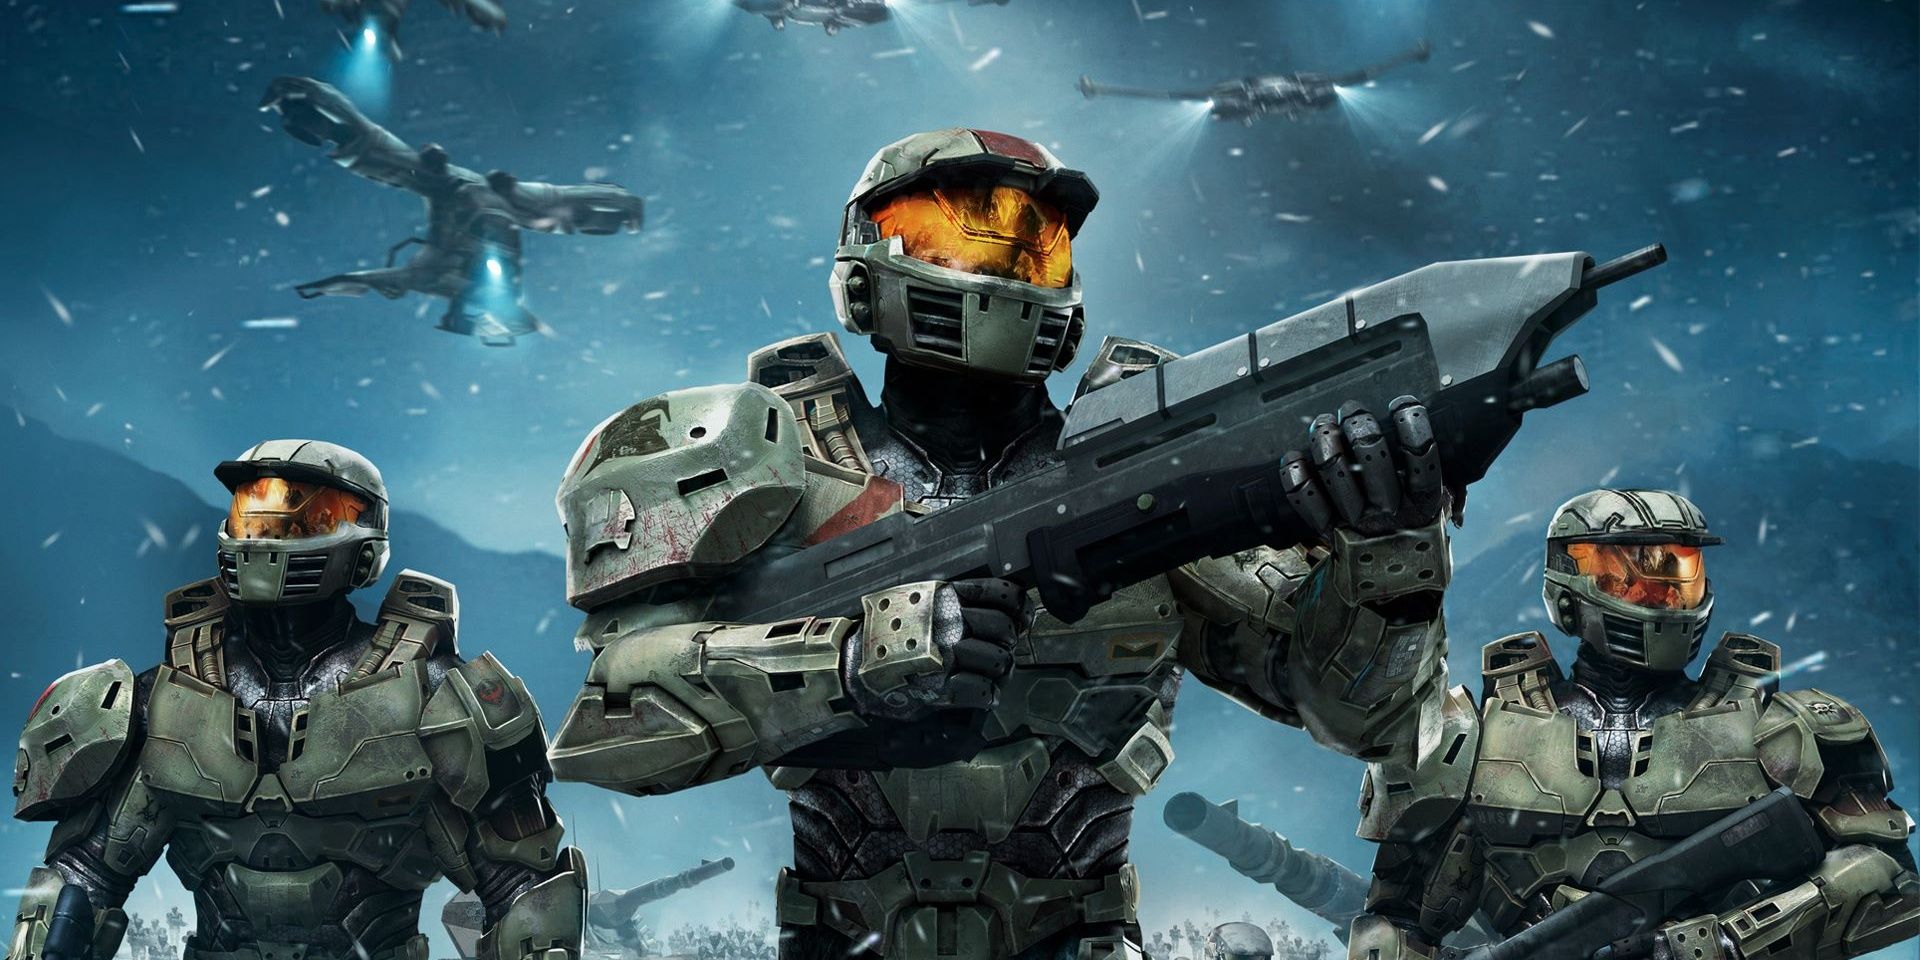 What To Expect From Showtimes Halo TV Show